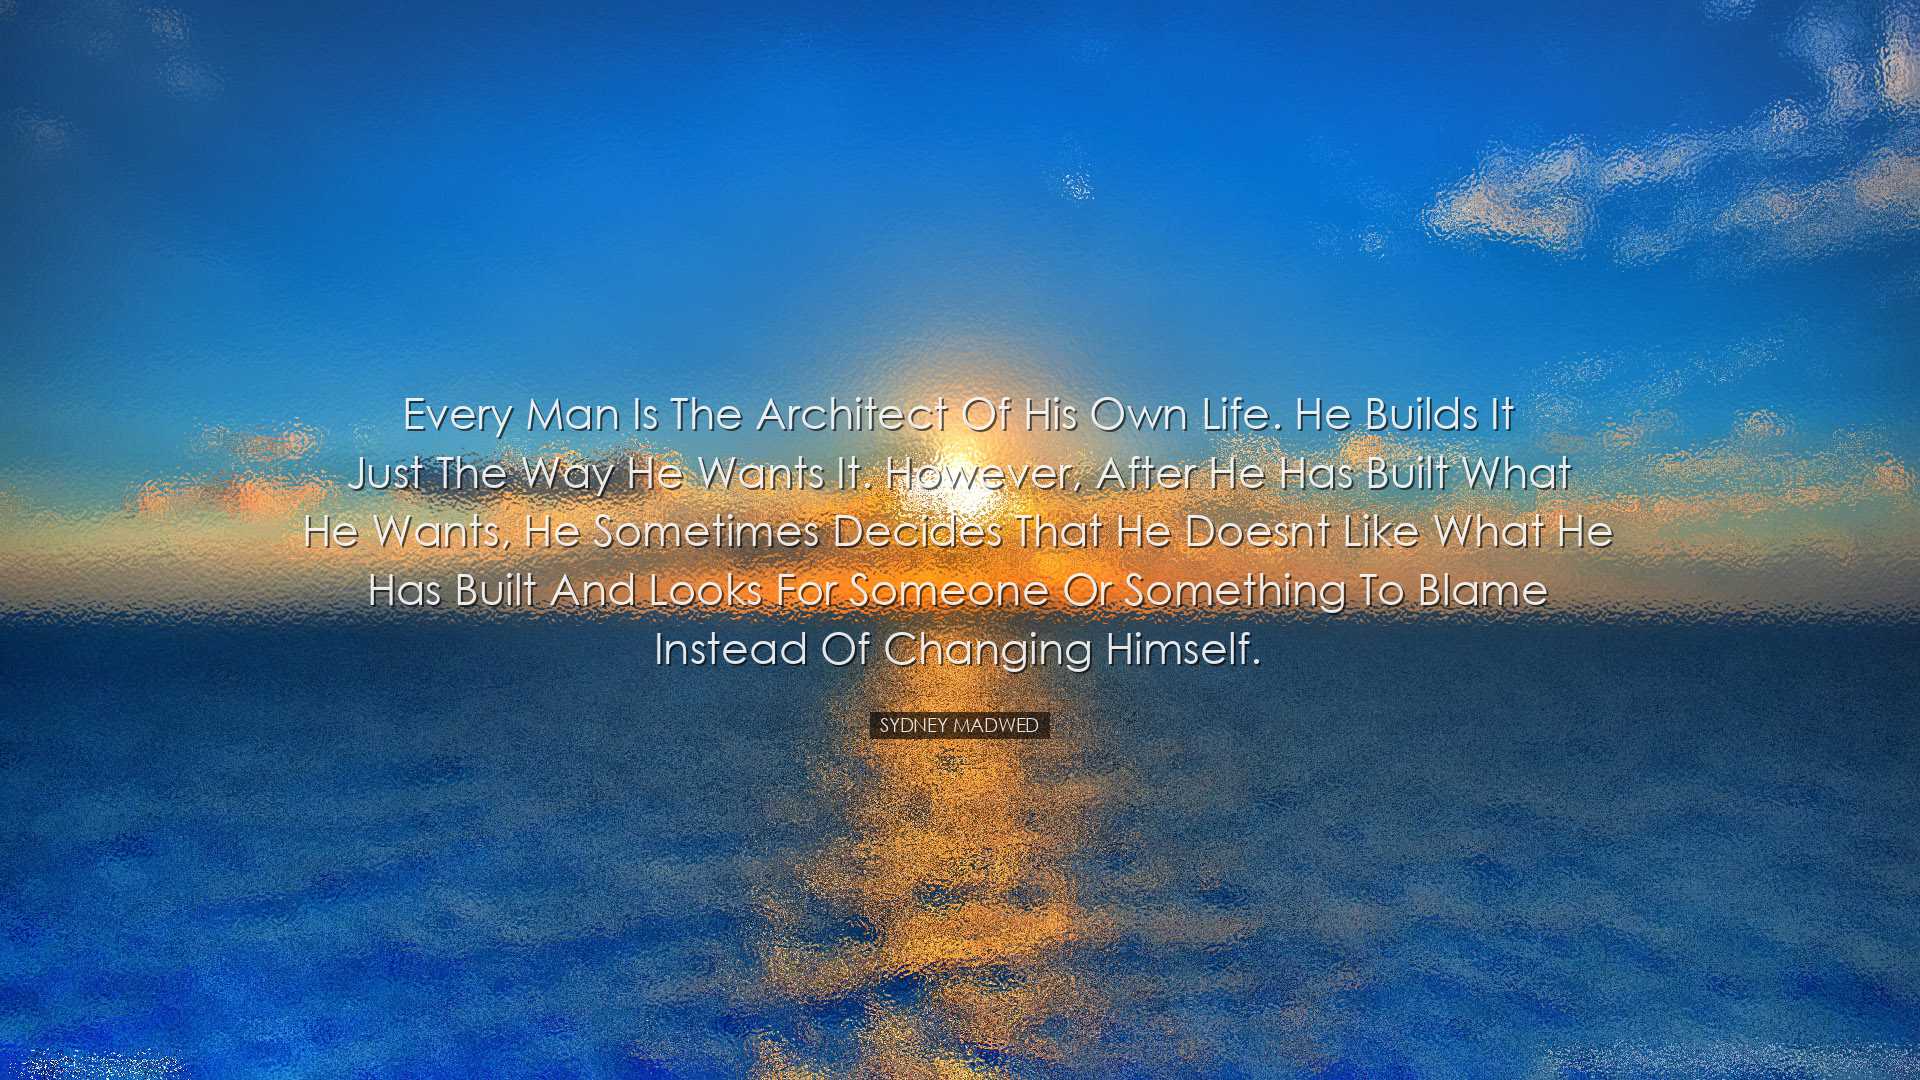 Every man is the architect of his own life. He builds it just the